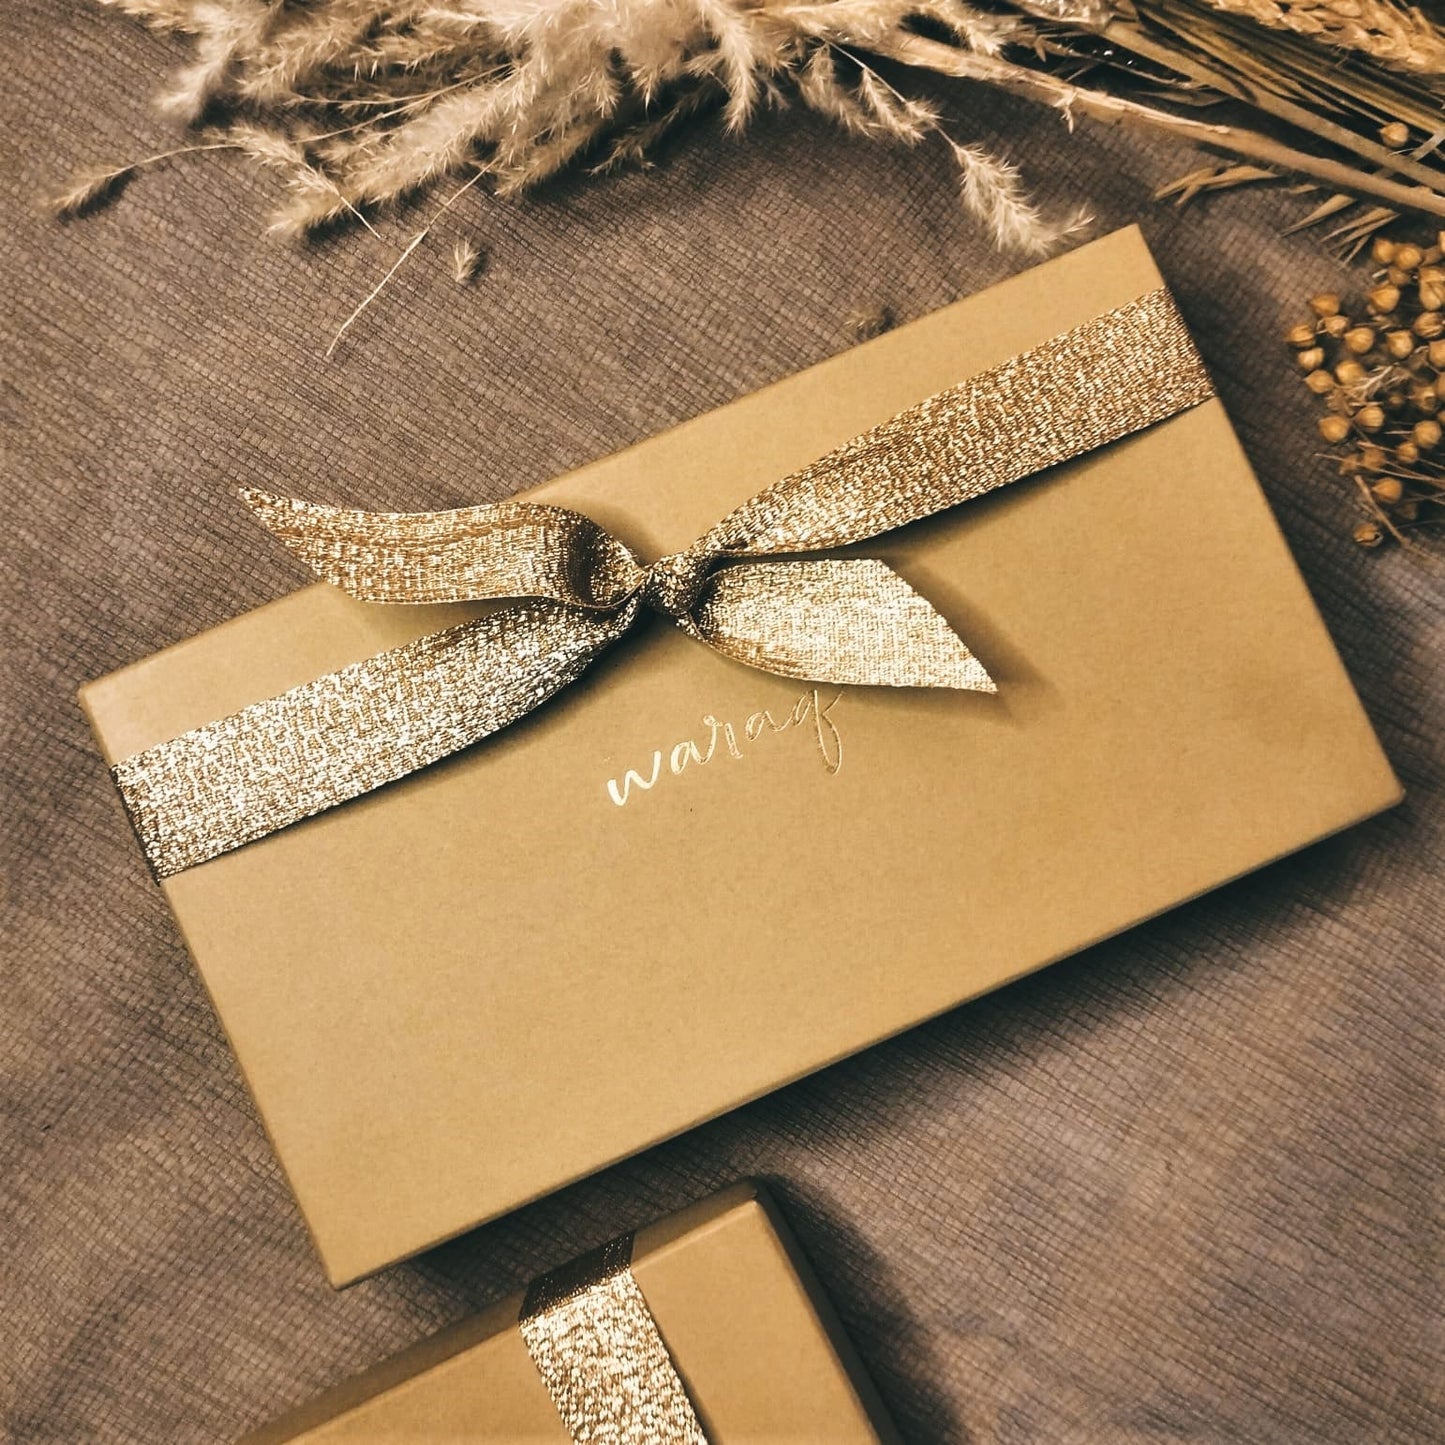 Image of a premium gift box for a scarf. The luxurious packaging makes it an ideal choice to present a special scarf as a gift.